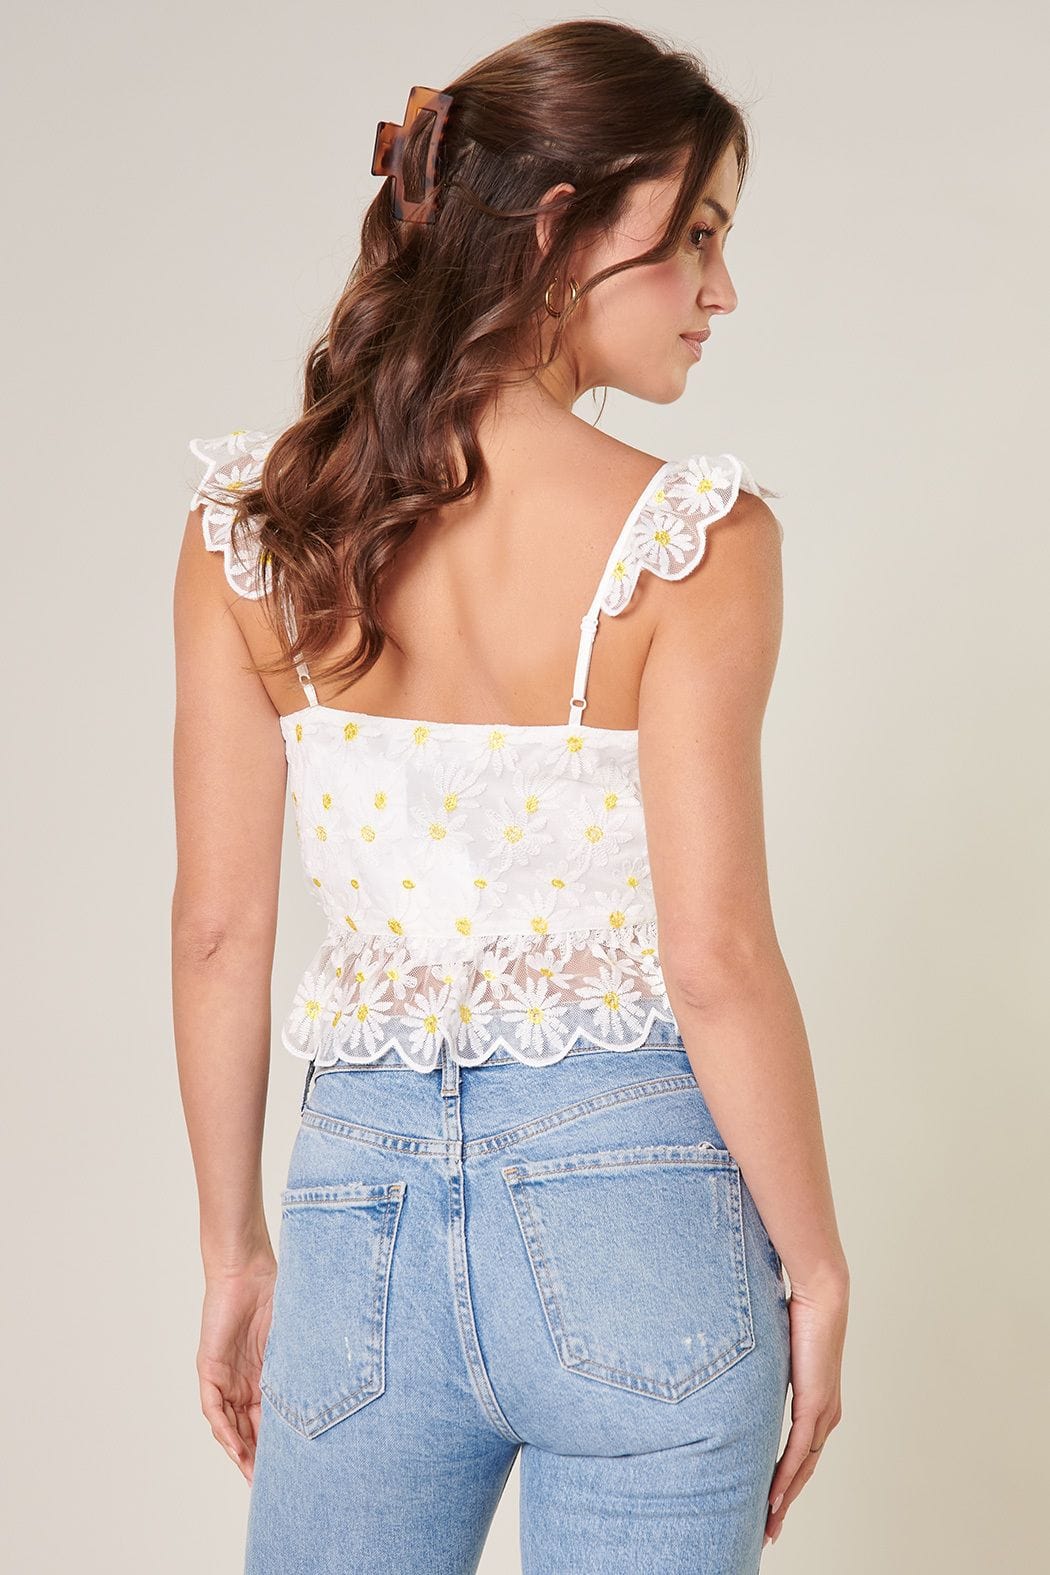 Cassiopeia Floral Ruffle Front Tie Lace Crop Top - Shirts &amp; Tops - Blooming Daily